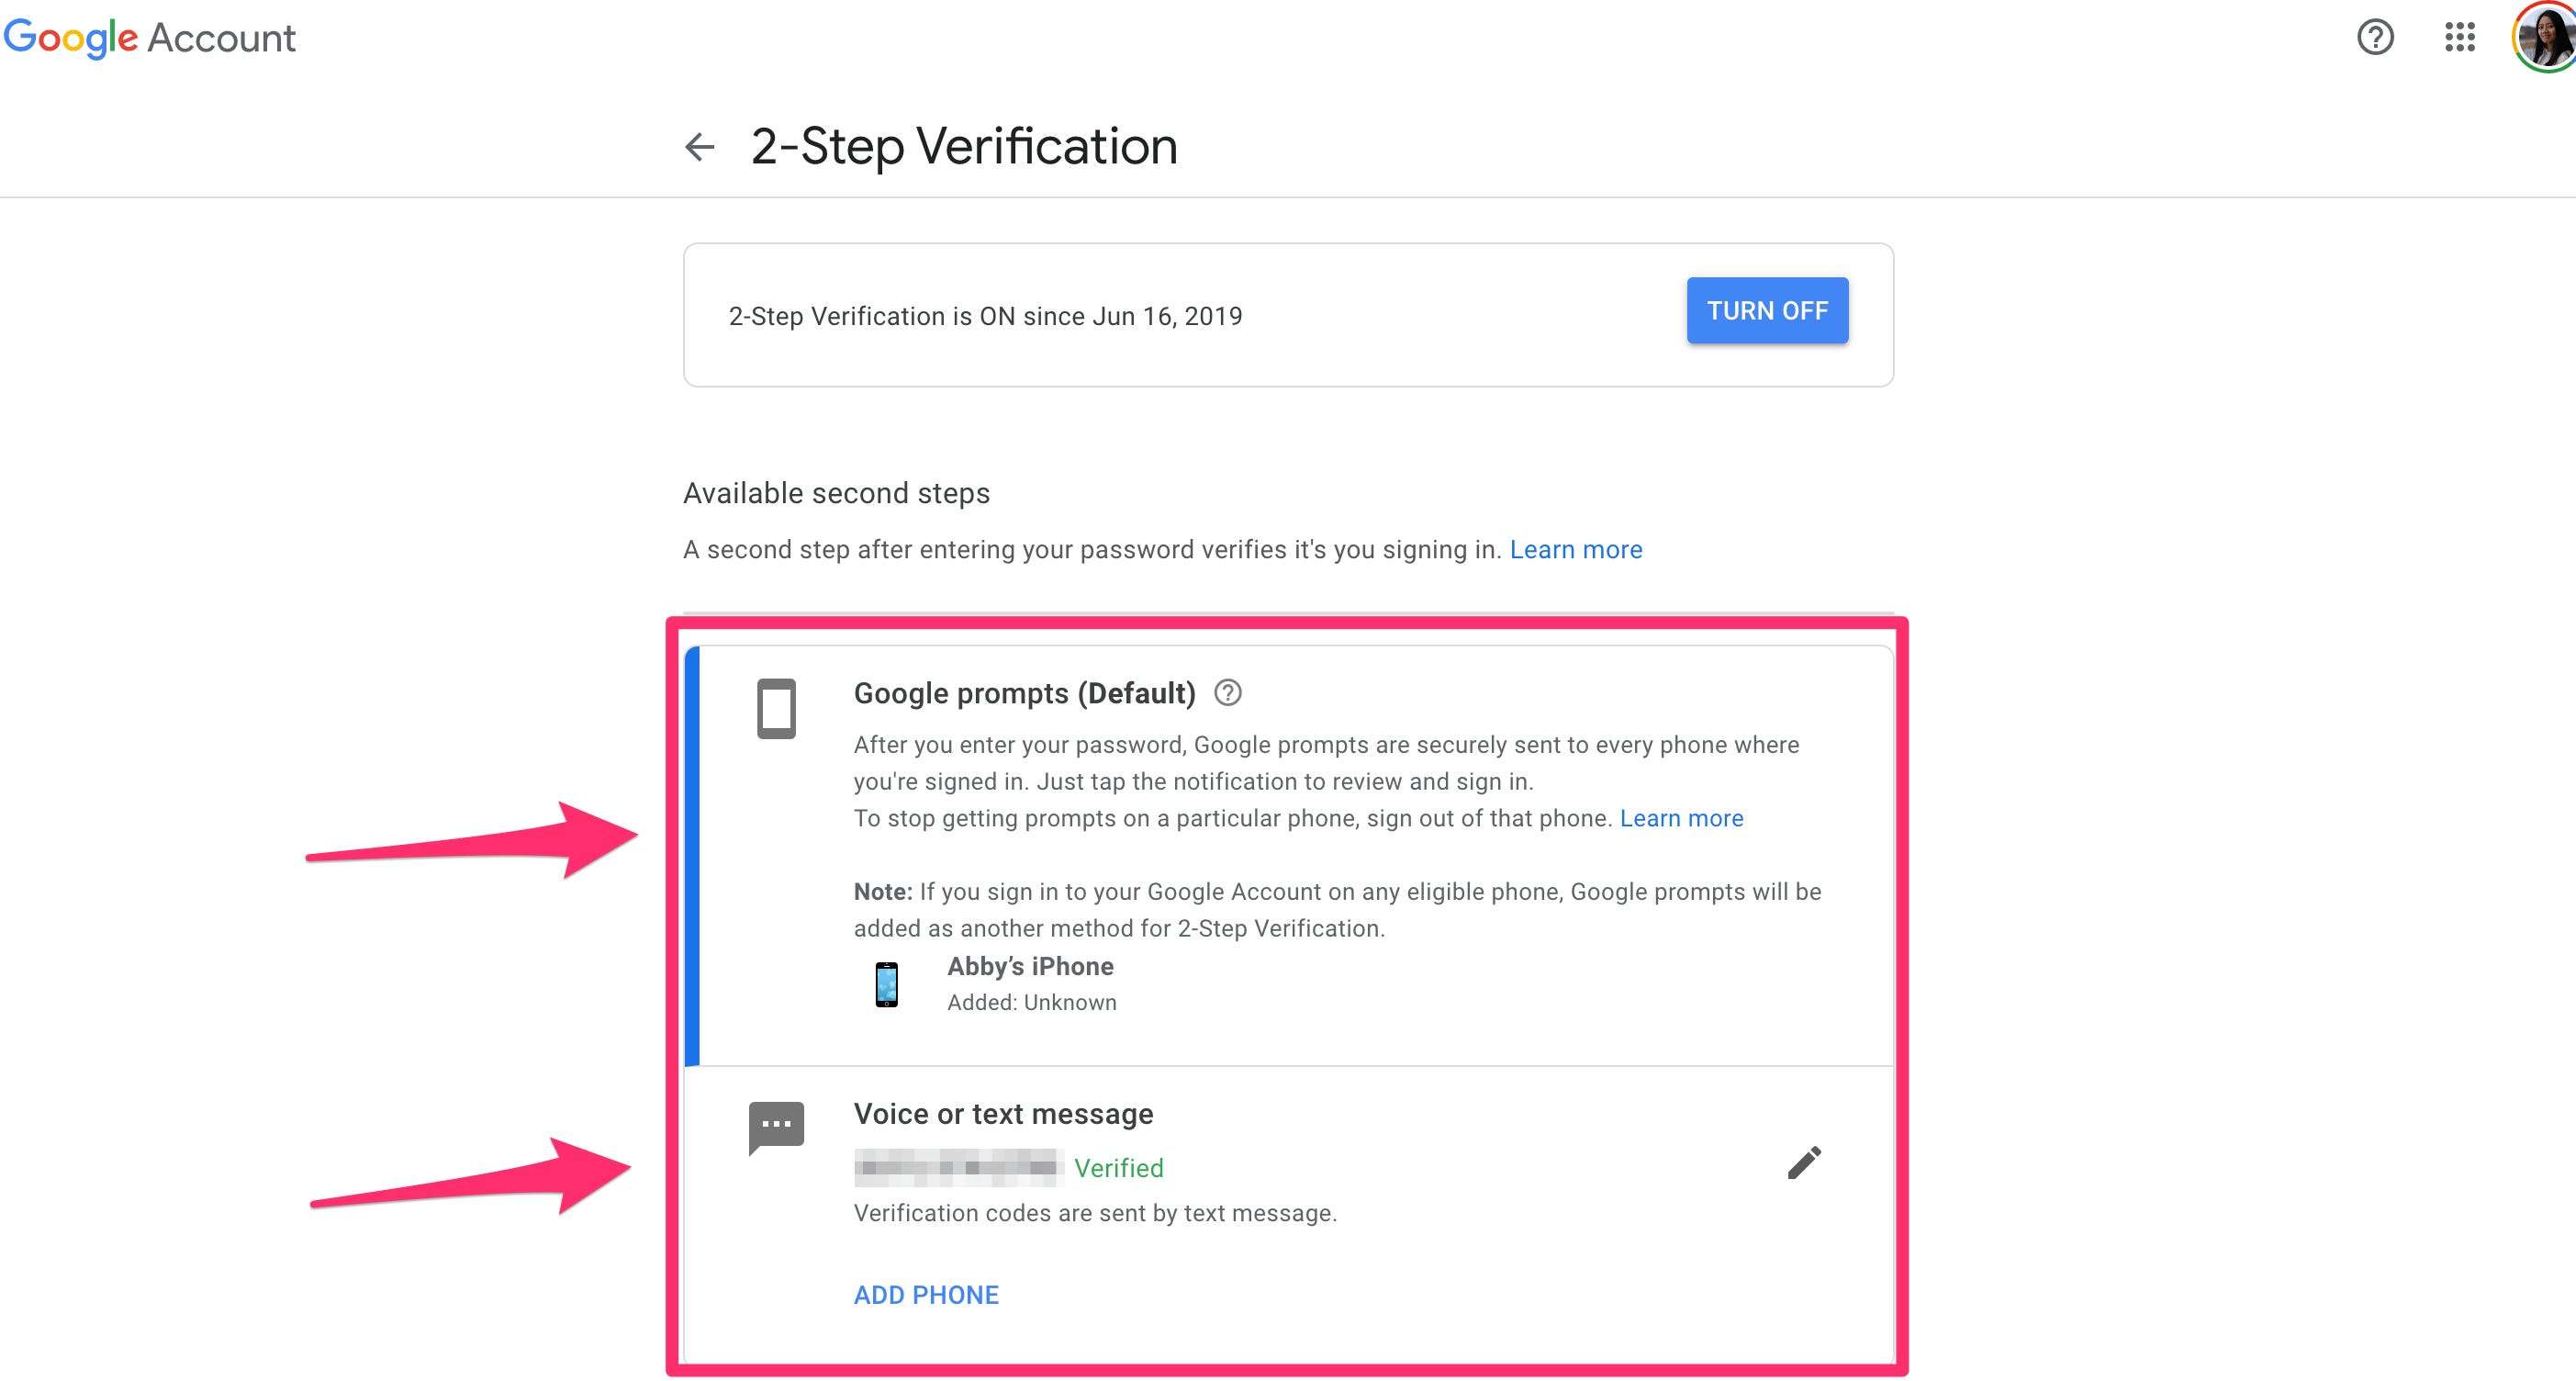 Tap on Add Account and select Google.
Follow the on-screen instructions to re-add your Google Account.